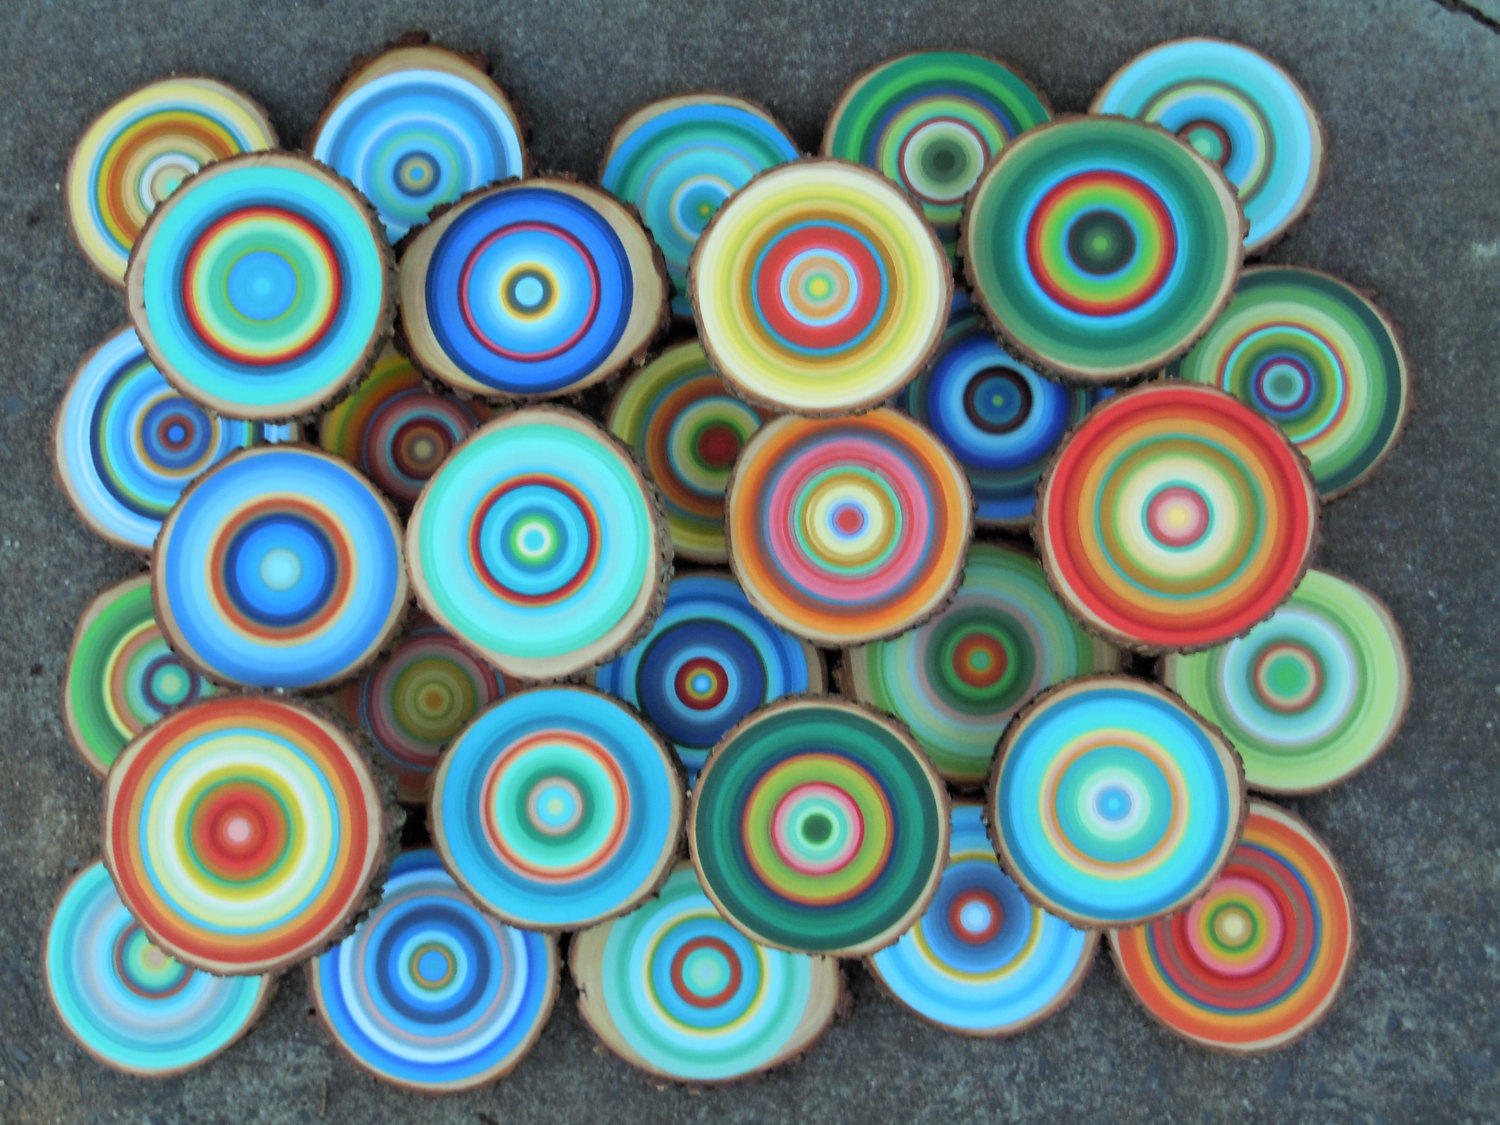 Colorful Art from Wood Slices